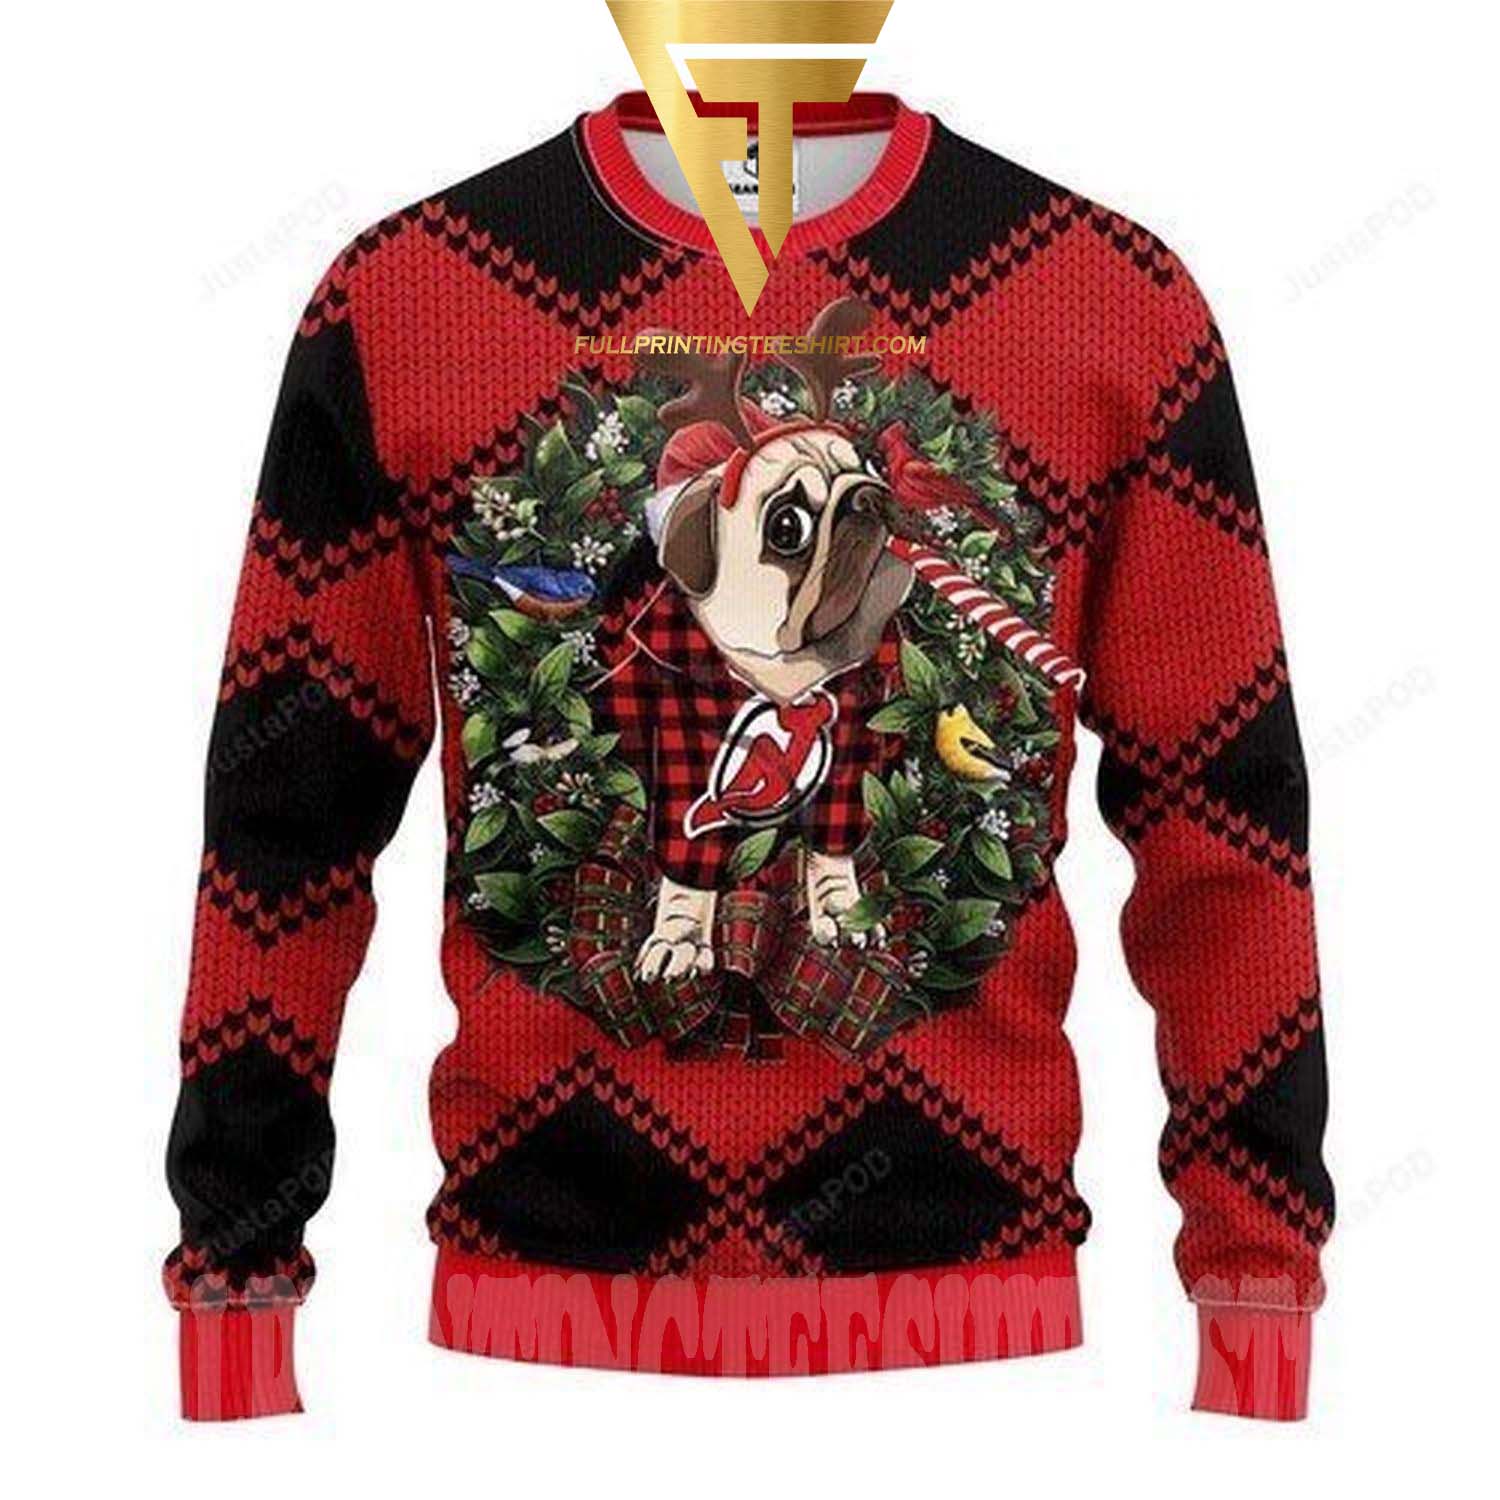 Devils Ugly Christmas Sweater Discount New Jersey Devils Gift